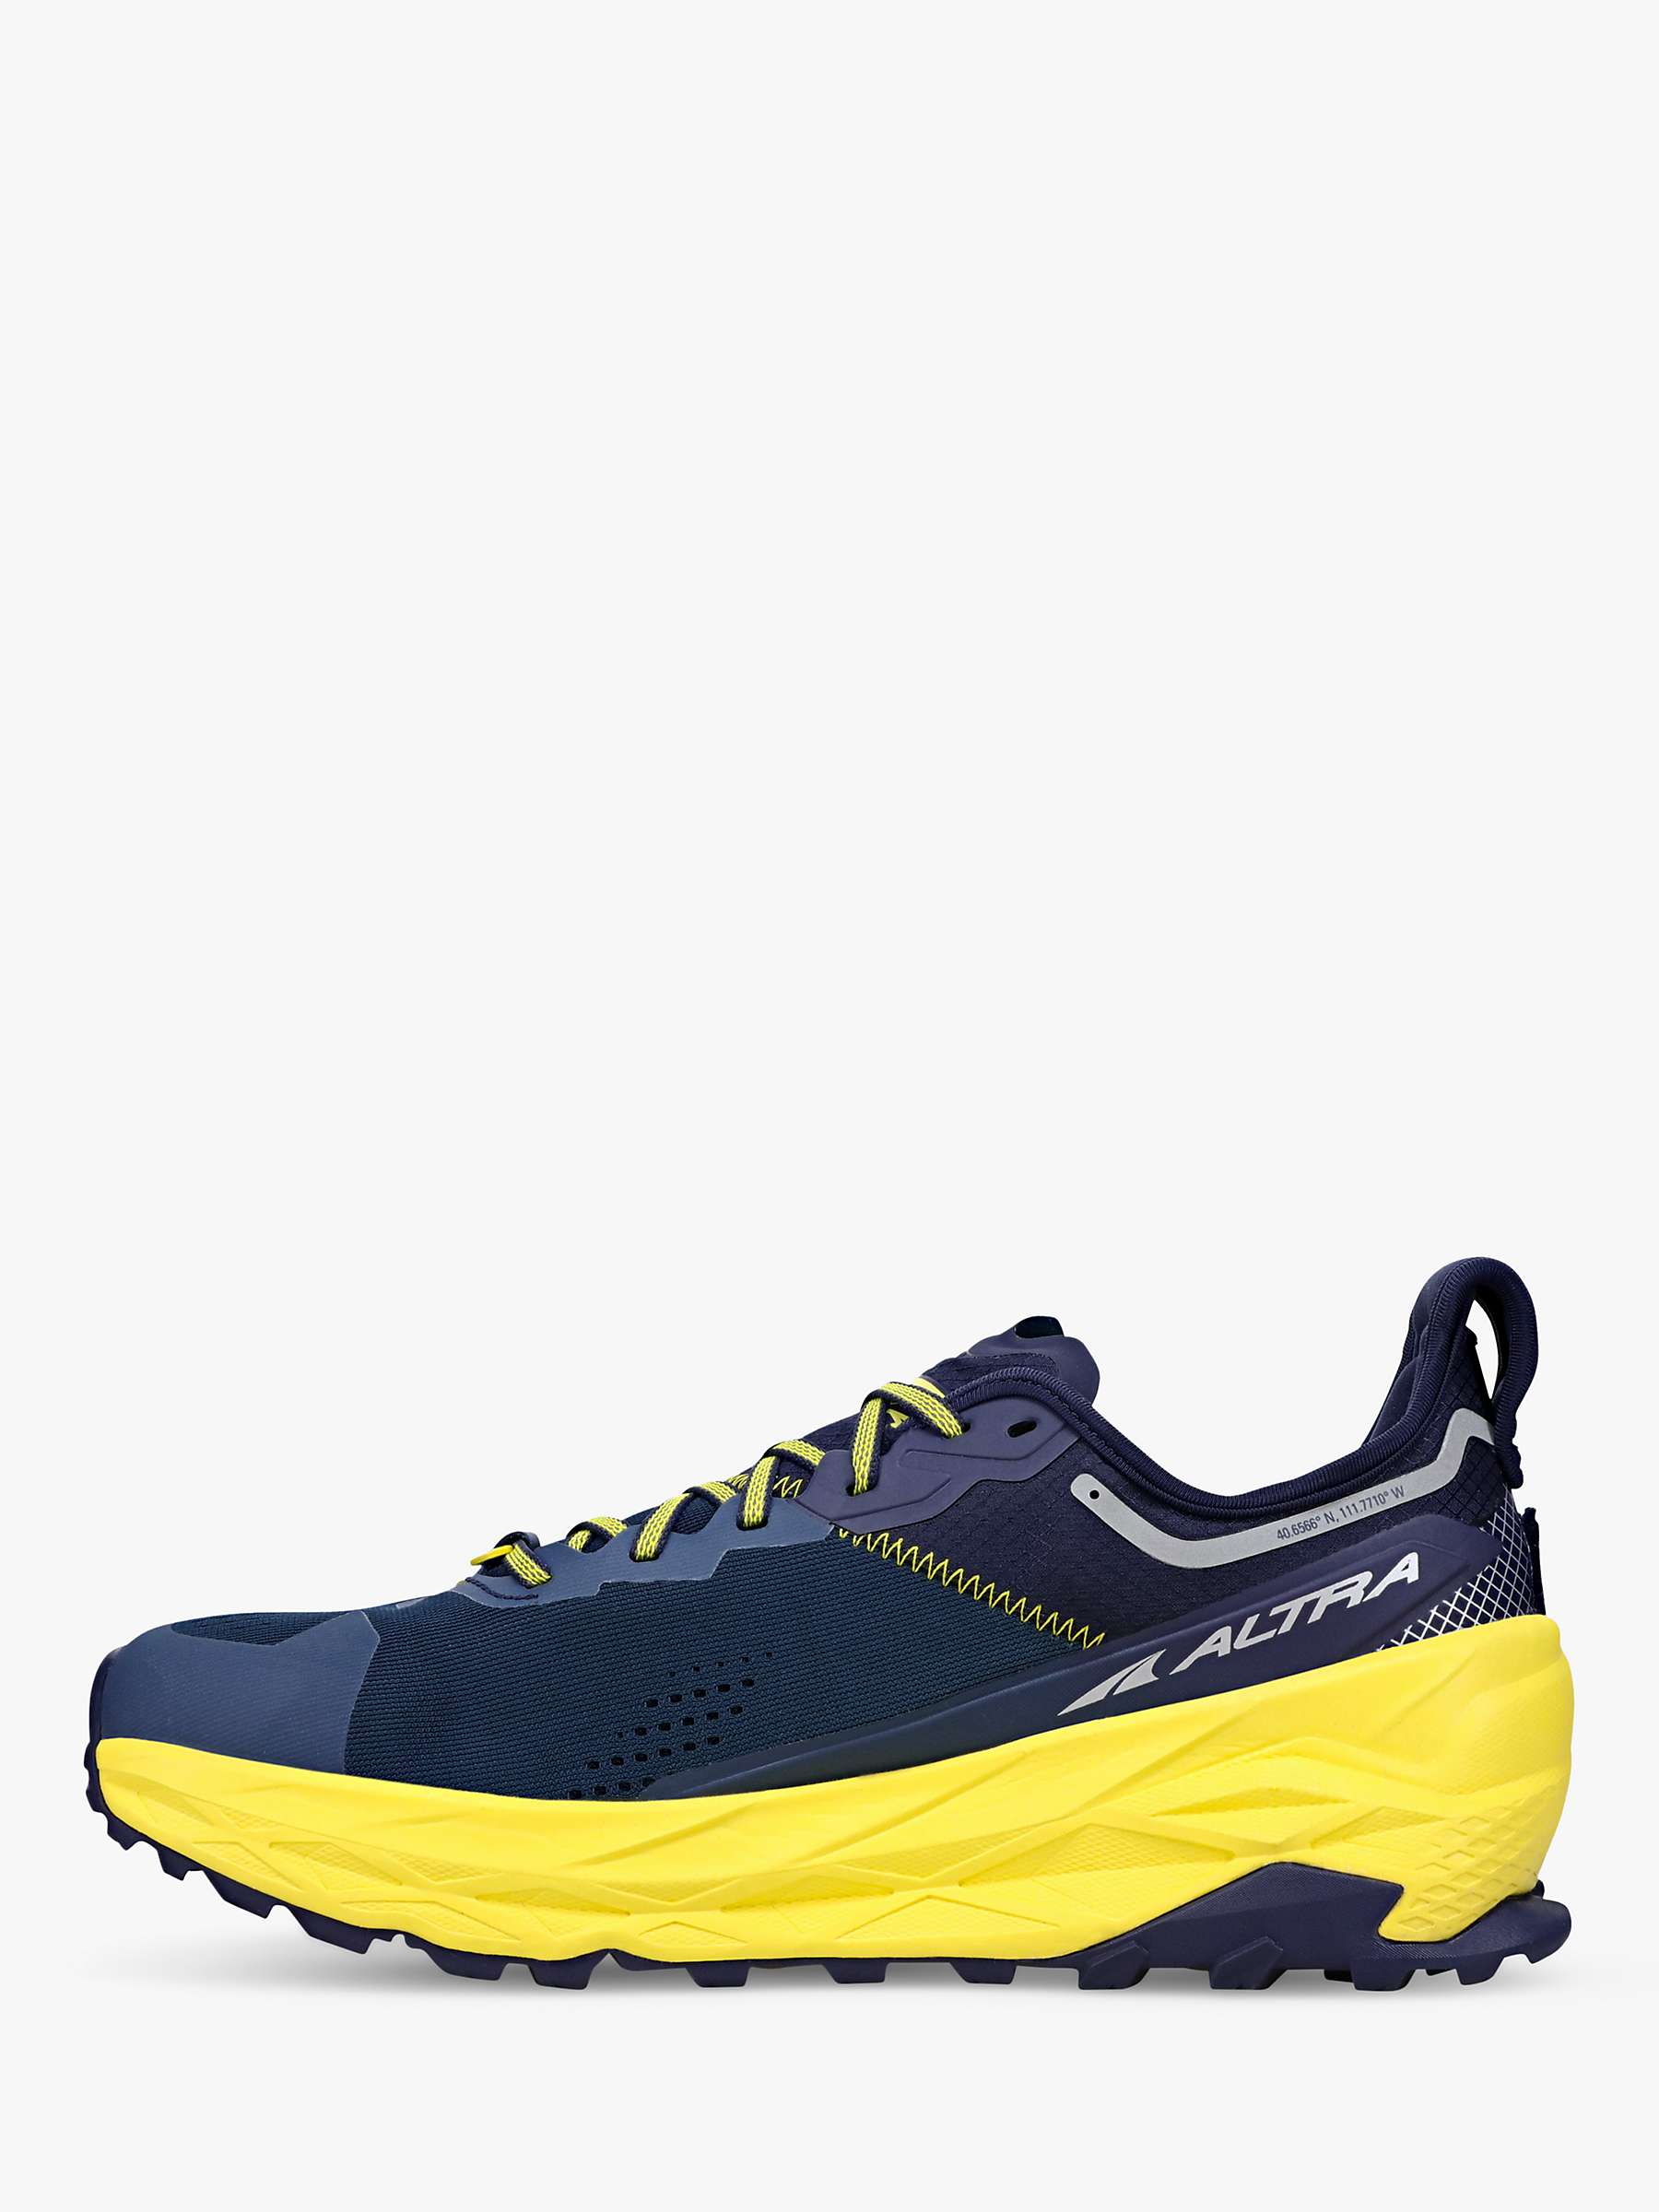 Buy Altra Olympus 5 Men's Trail Running Shoes Online at johnlewis.com